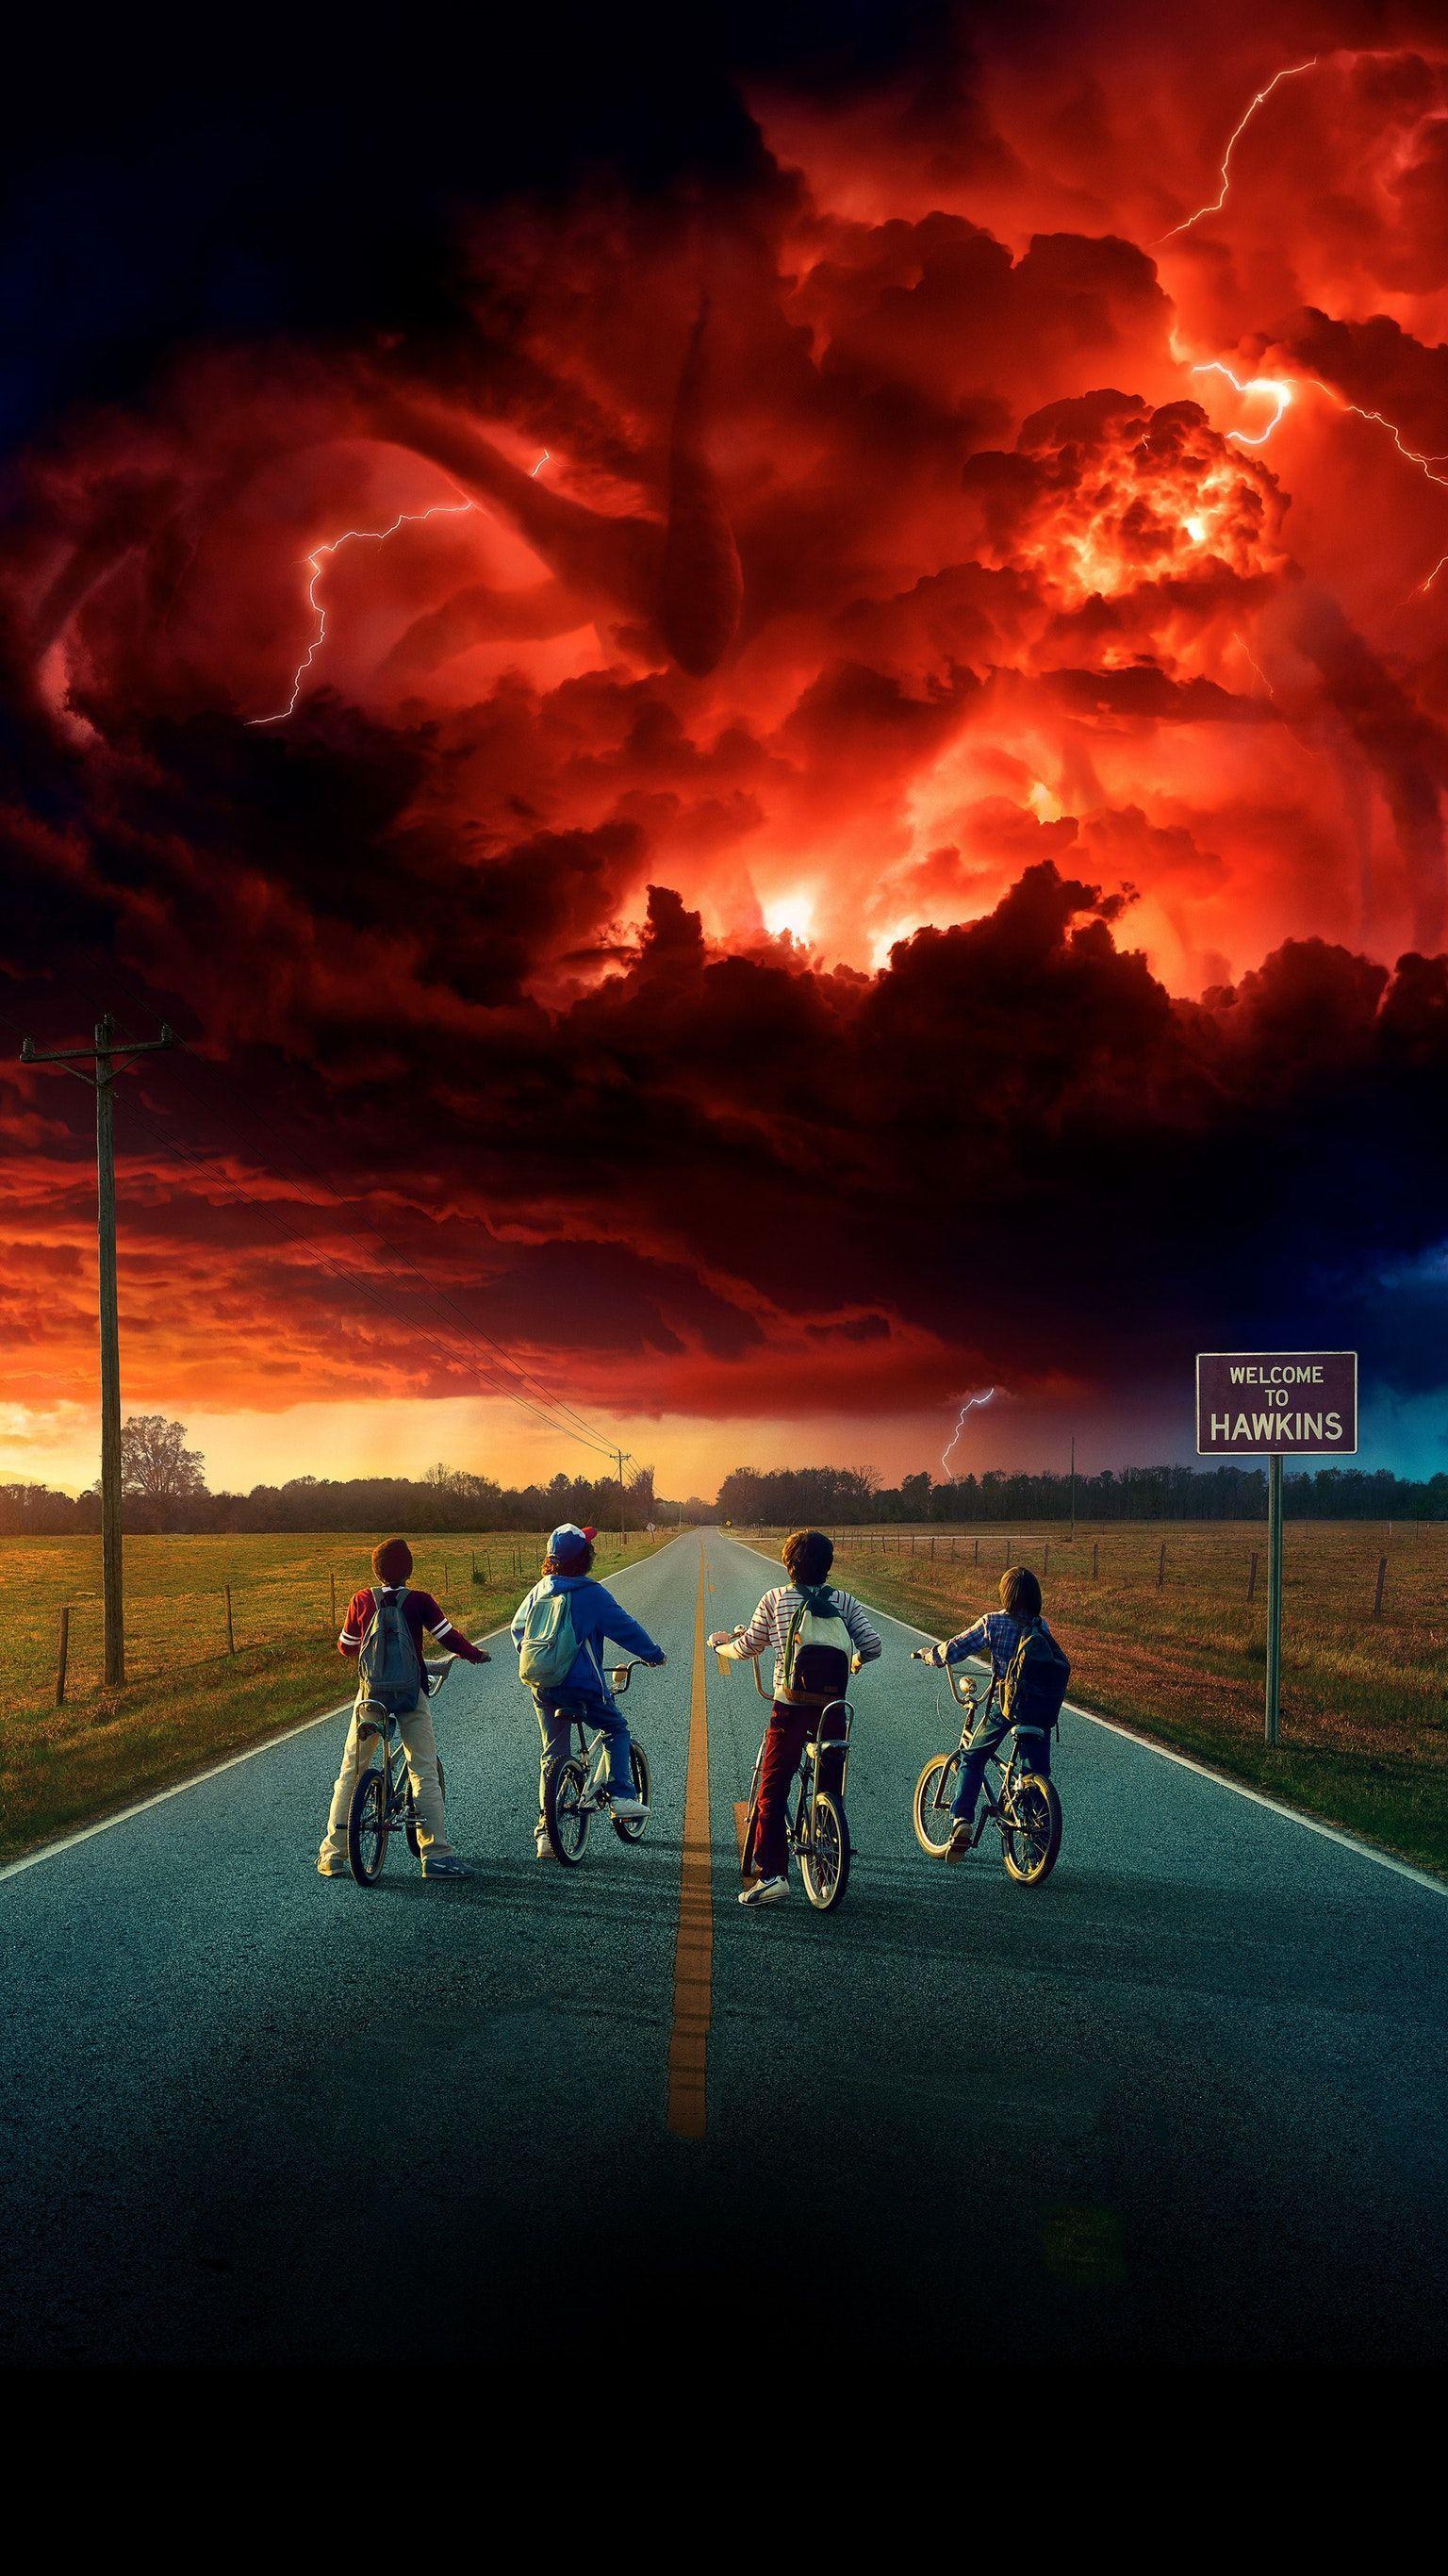 Stranger things funny HD wallpapers  Pxfuel